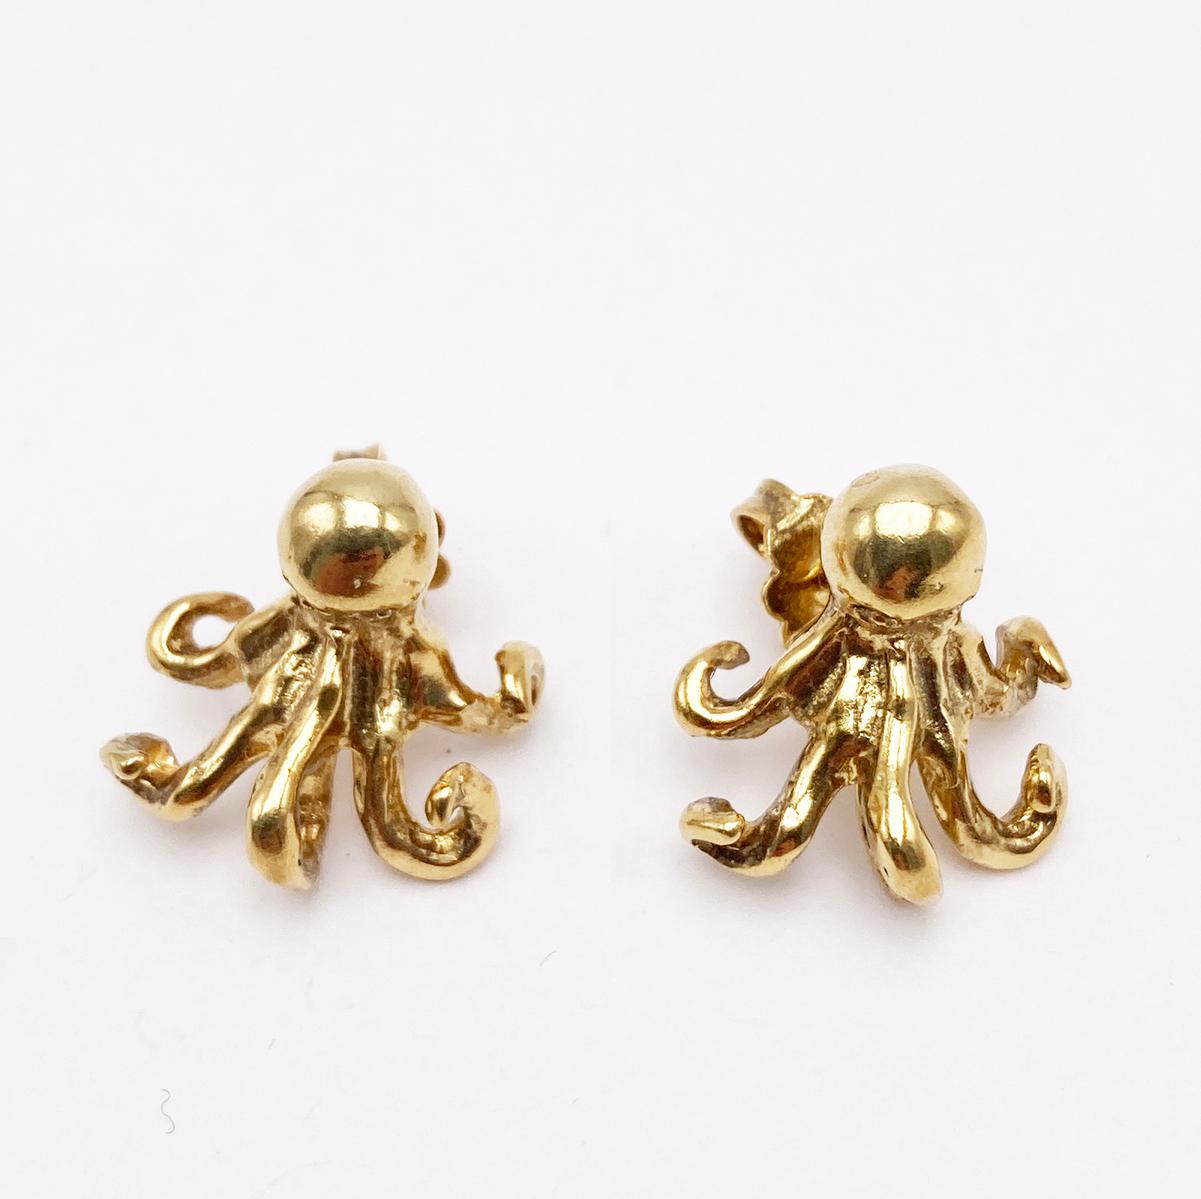 Rossella Ugolini 18K Yellow Gold Handcrafted Octopus Stud Earrings In New Condition For Sale In Rome, IT